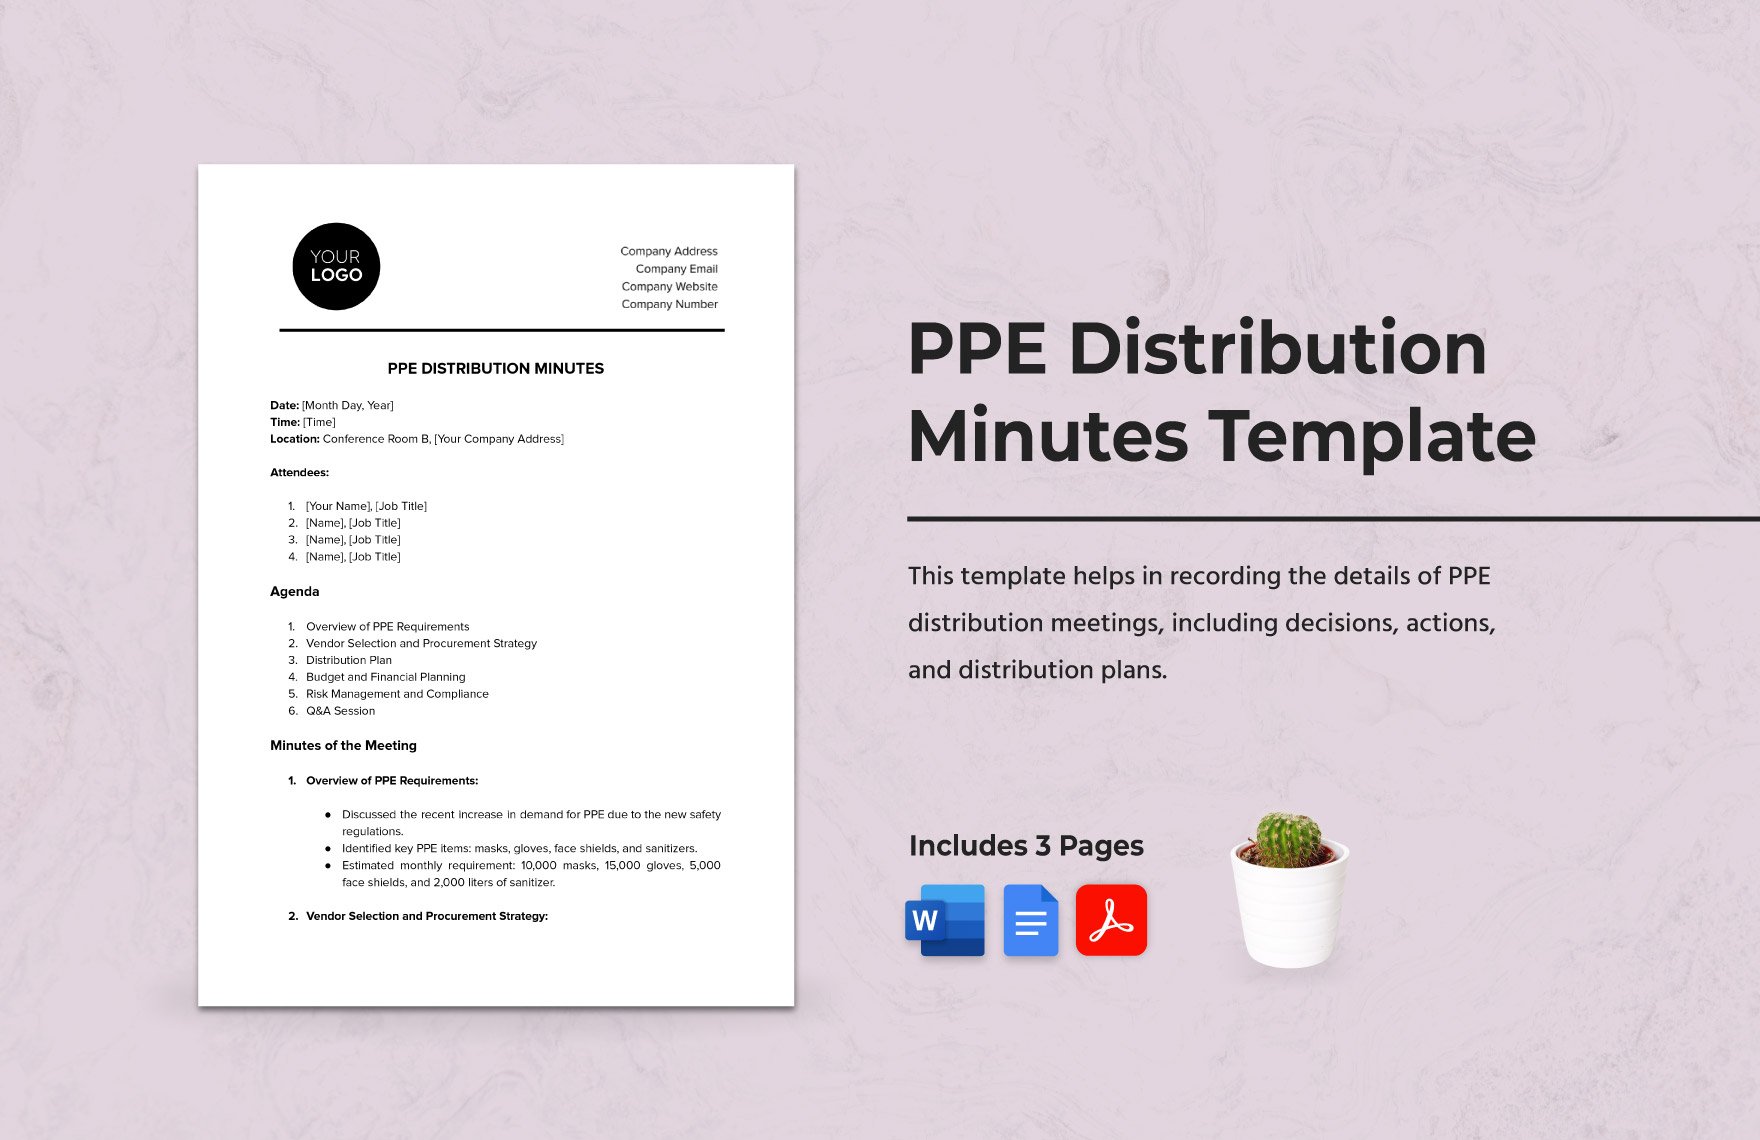 PPE Distribution Minutes Template 